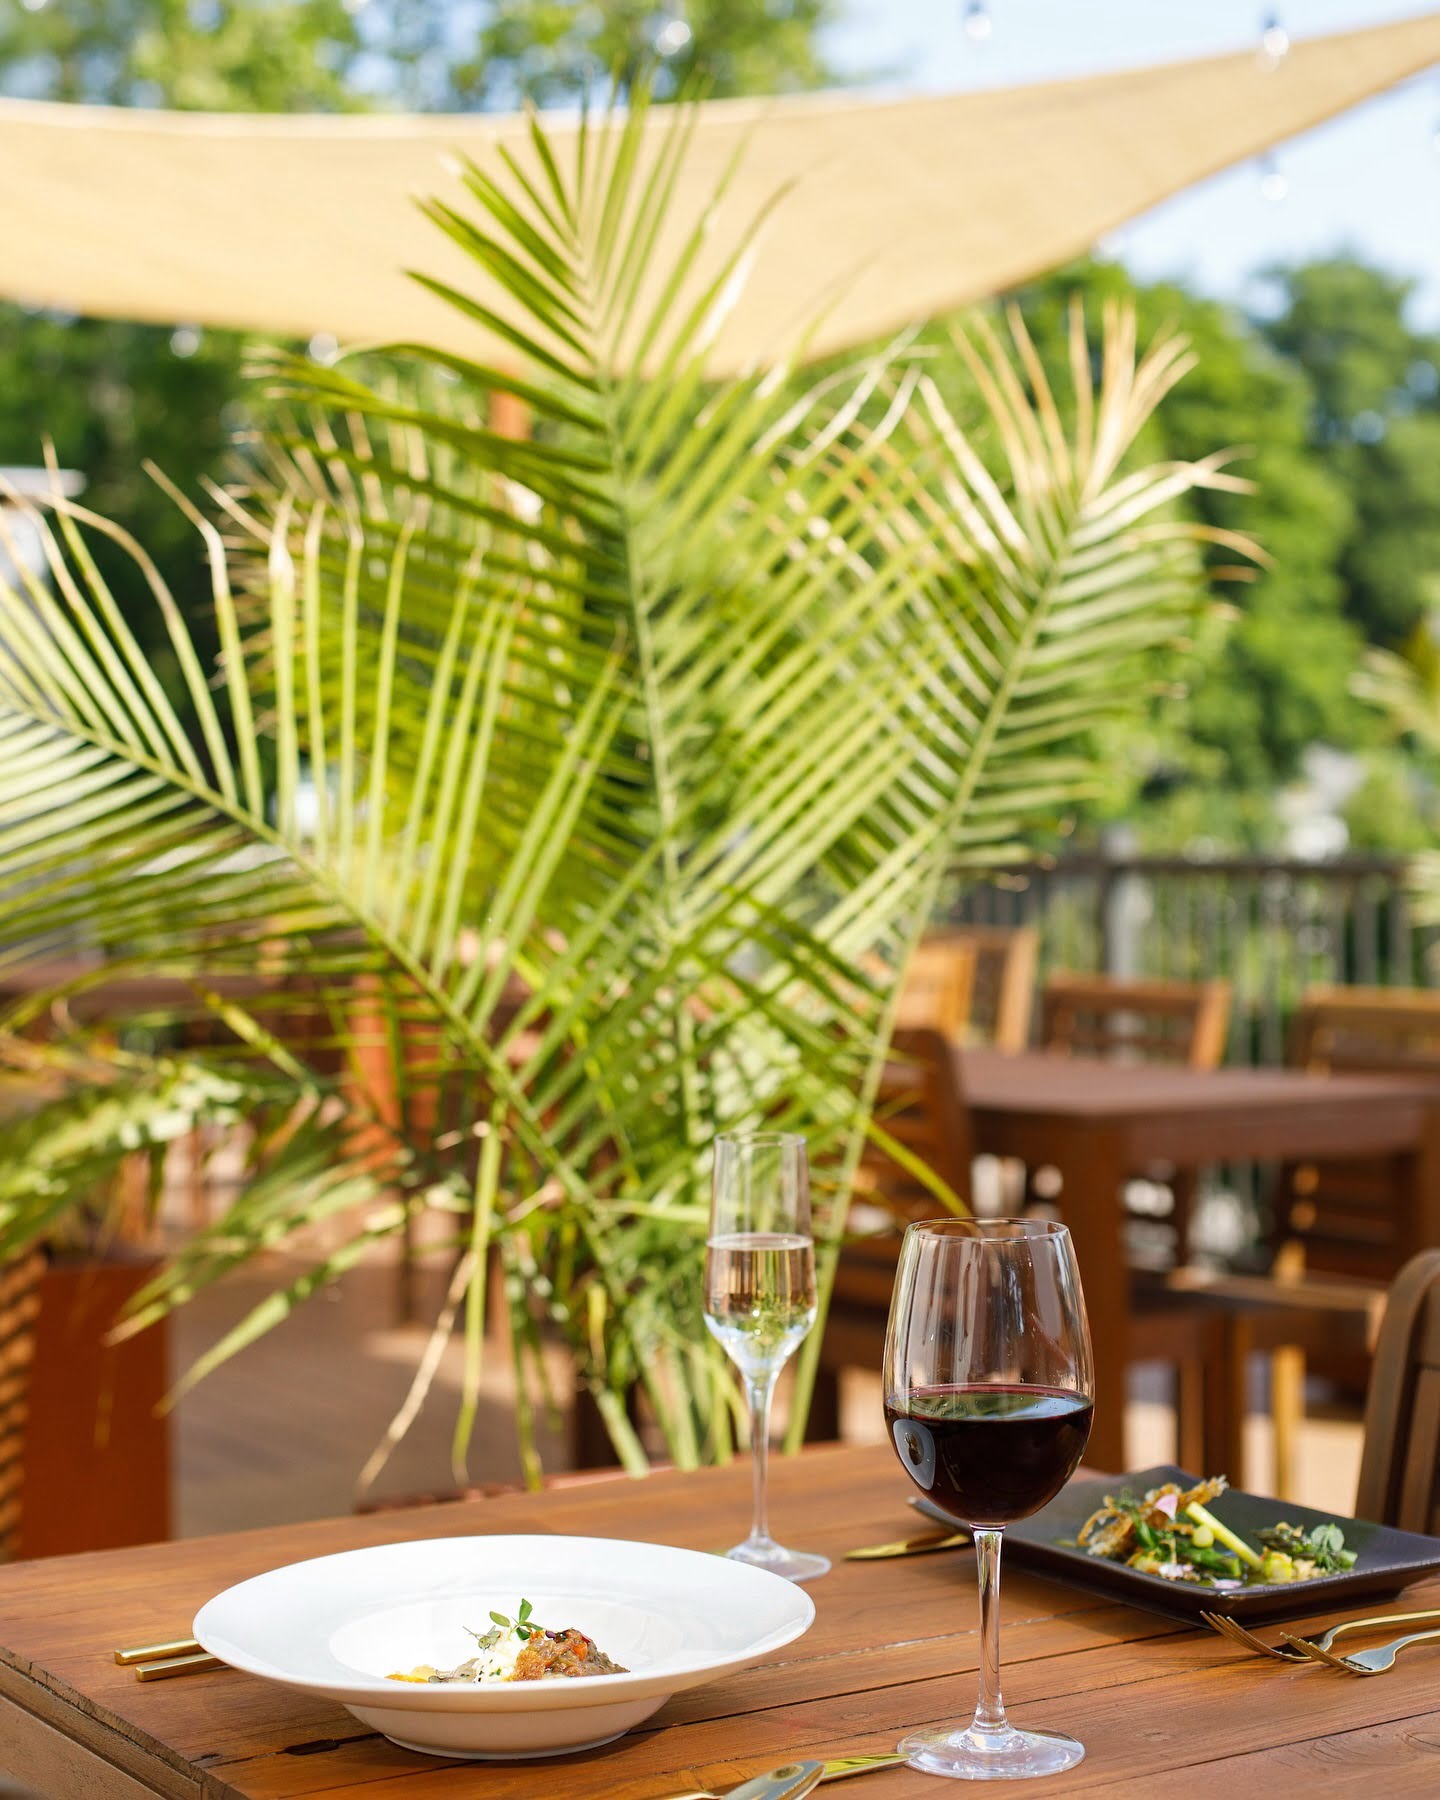 Dinner al fresco is just around the corner Book your stay at The Harrison with dinner at Provence and enjoy the best that Cape May has to offer wwwProvenceCapeMaycom